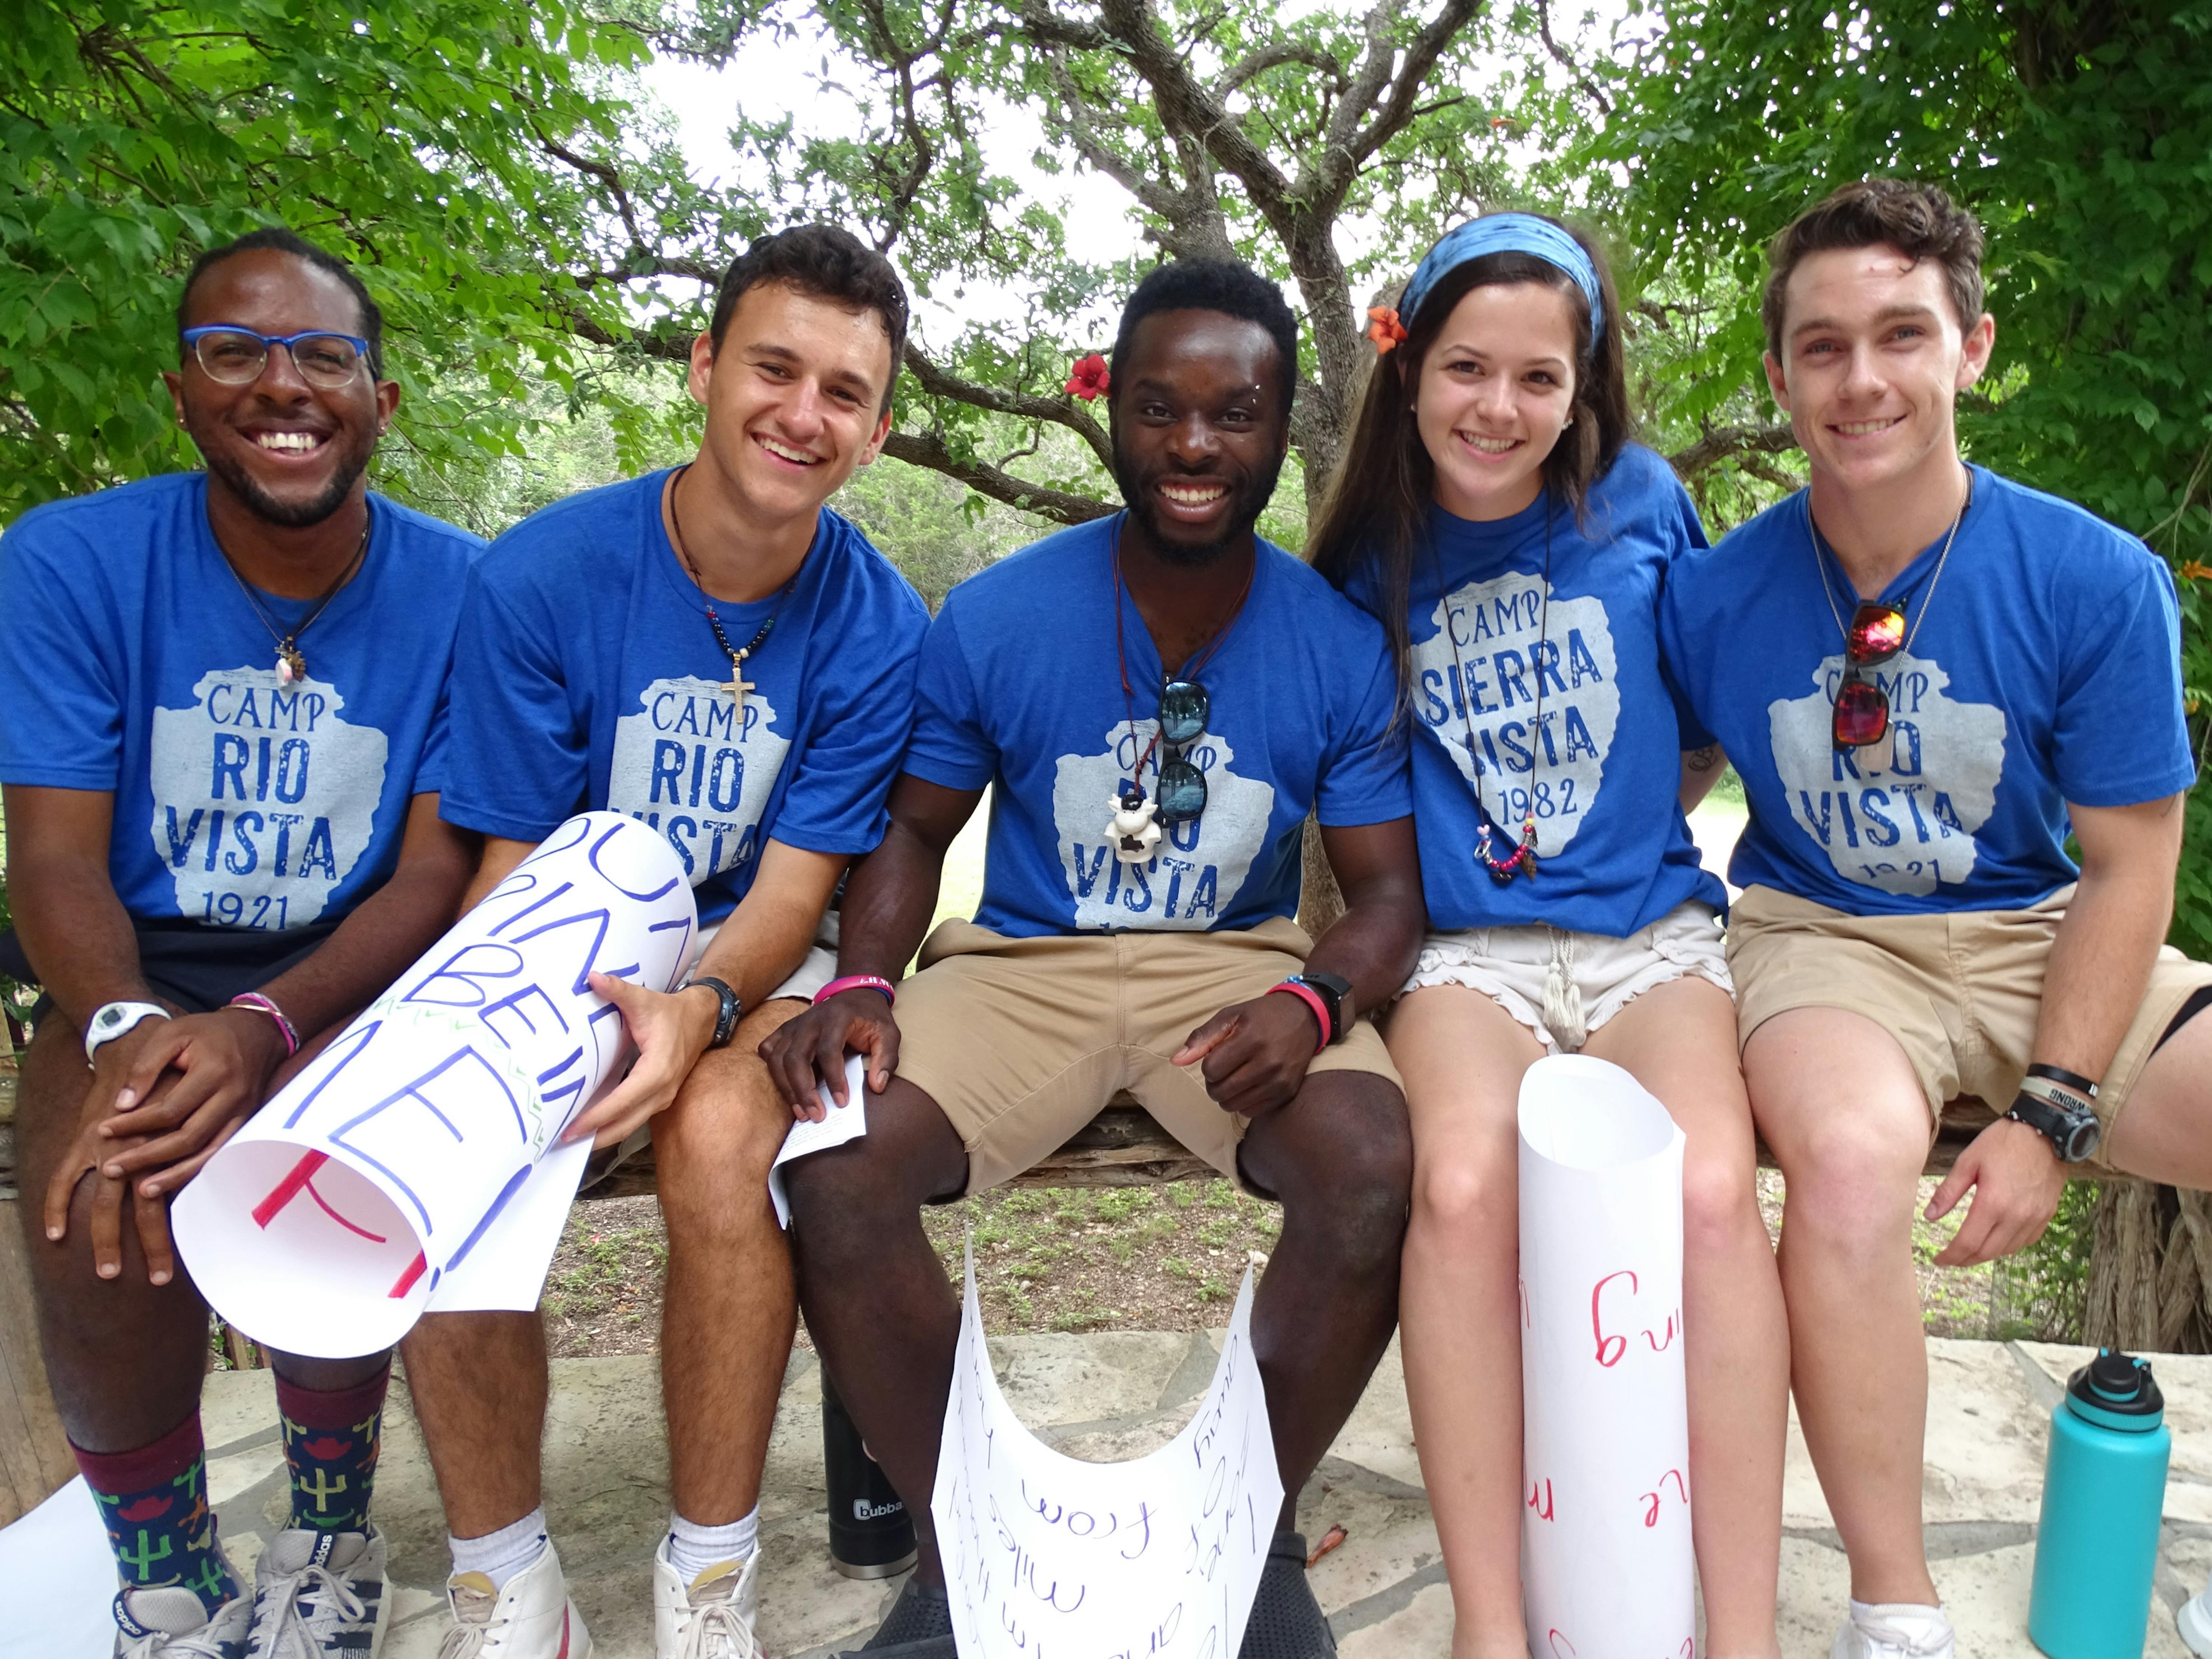 Christian summer camp counselor jobs in texas